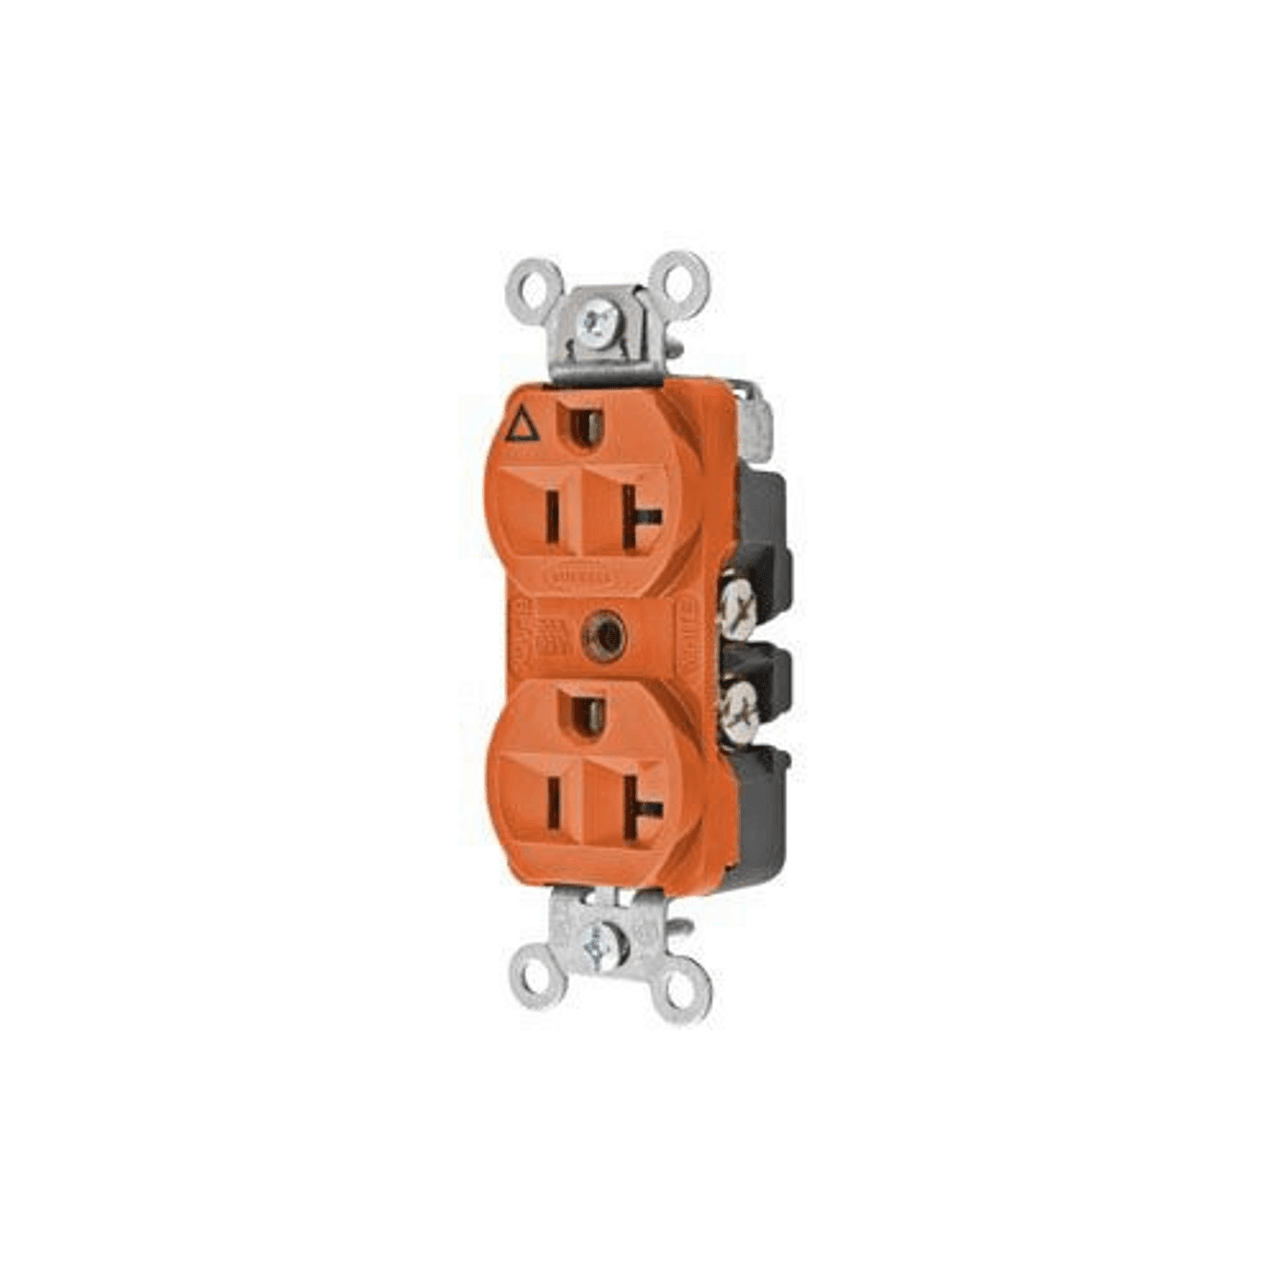 Hubbell CR5352IG Straight Blade Devices, Receptacles, Duplex, Hubbell-Pro Heavy Duty, 2-Pole 3-Wire Grounding, 20A 125V, 5-20R, Orange, Single Pack, Isolated Ground.  ; Triangle marking on face indicates isolated ground ; Slender/compact design ; Finder Groove Face ; Isol